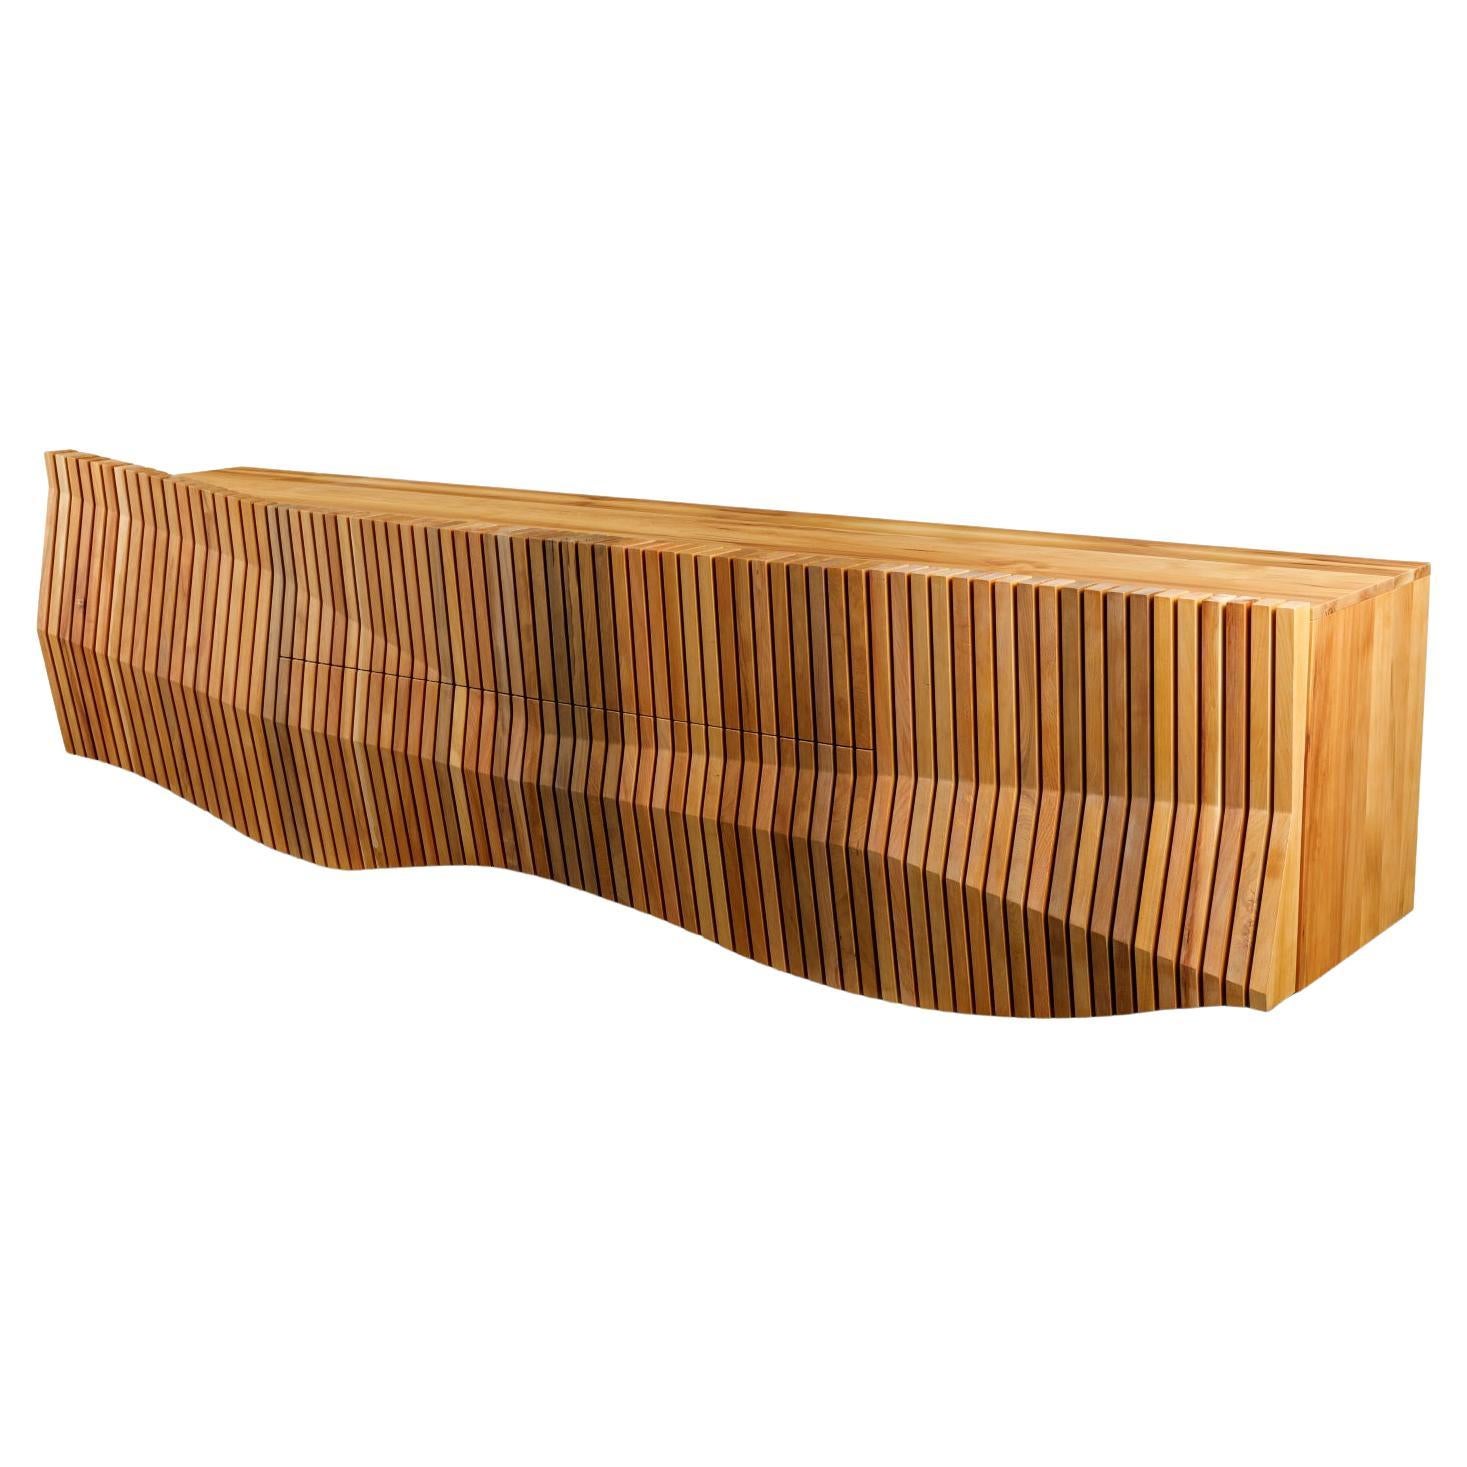 Nature Inspired Modern Organic Credenza Made from Sustainable River Rescued Wood